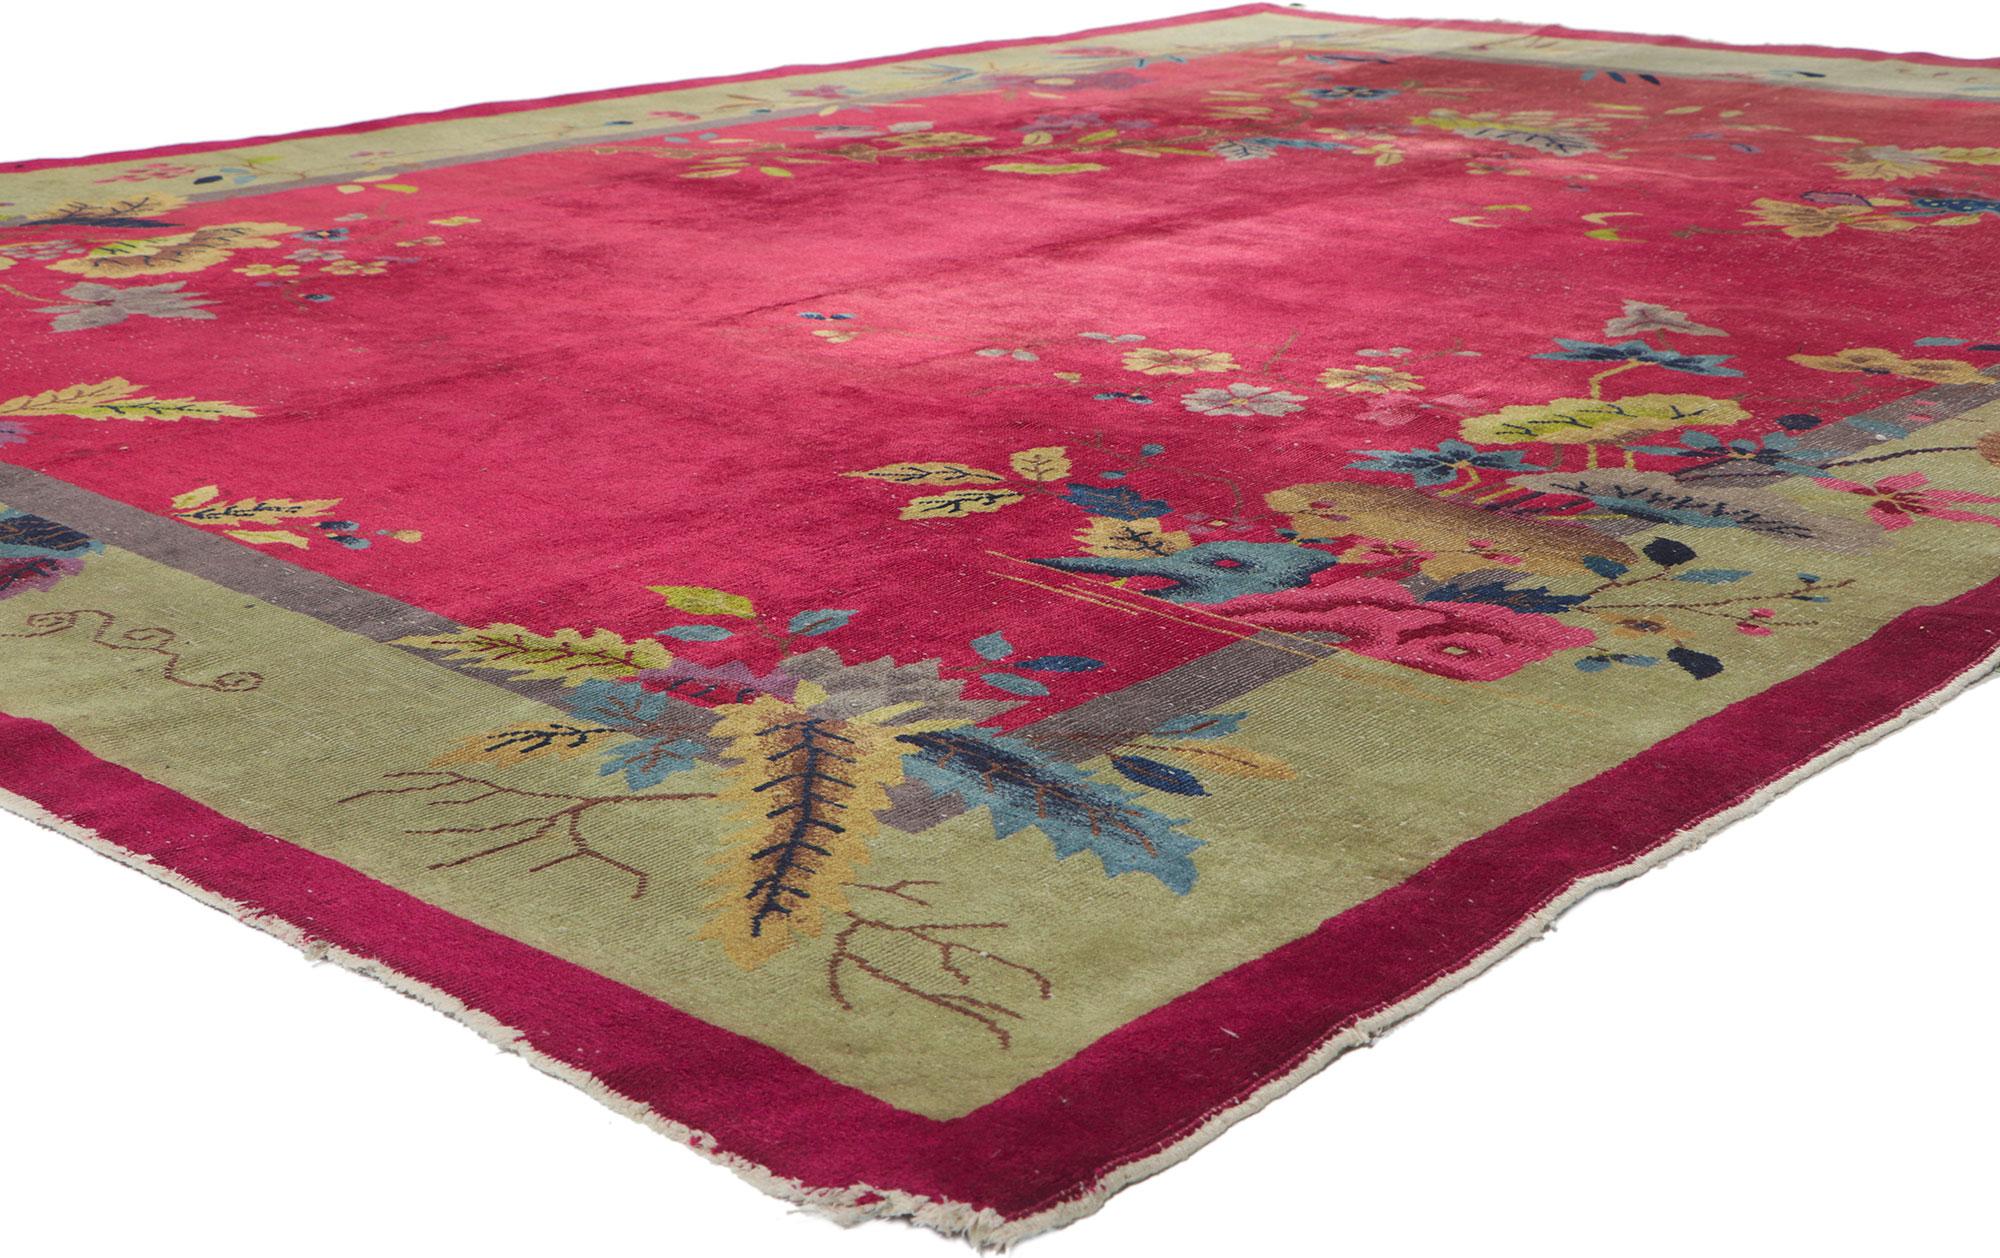 78317 Antique Chinese Art Deco Rug, 09'00 x 11'09. This hand knotted wool antique Chinese Art Deco rug features a color-blocked field and border scheme festooned with large, glorious sprays of flowers. Lotuses, peonies, chrysanthemums, and plum